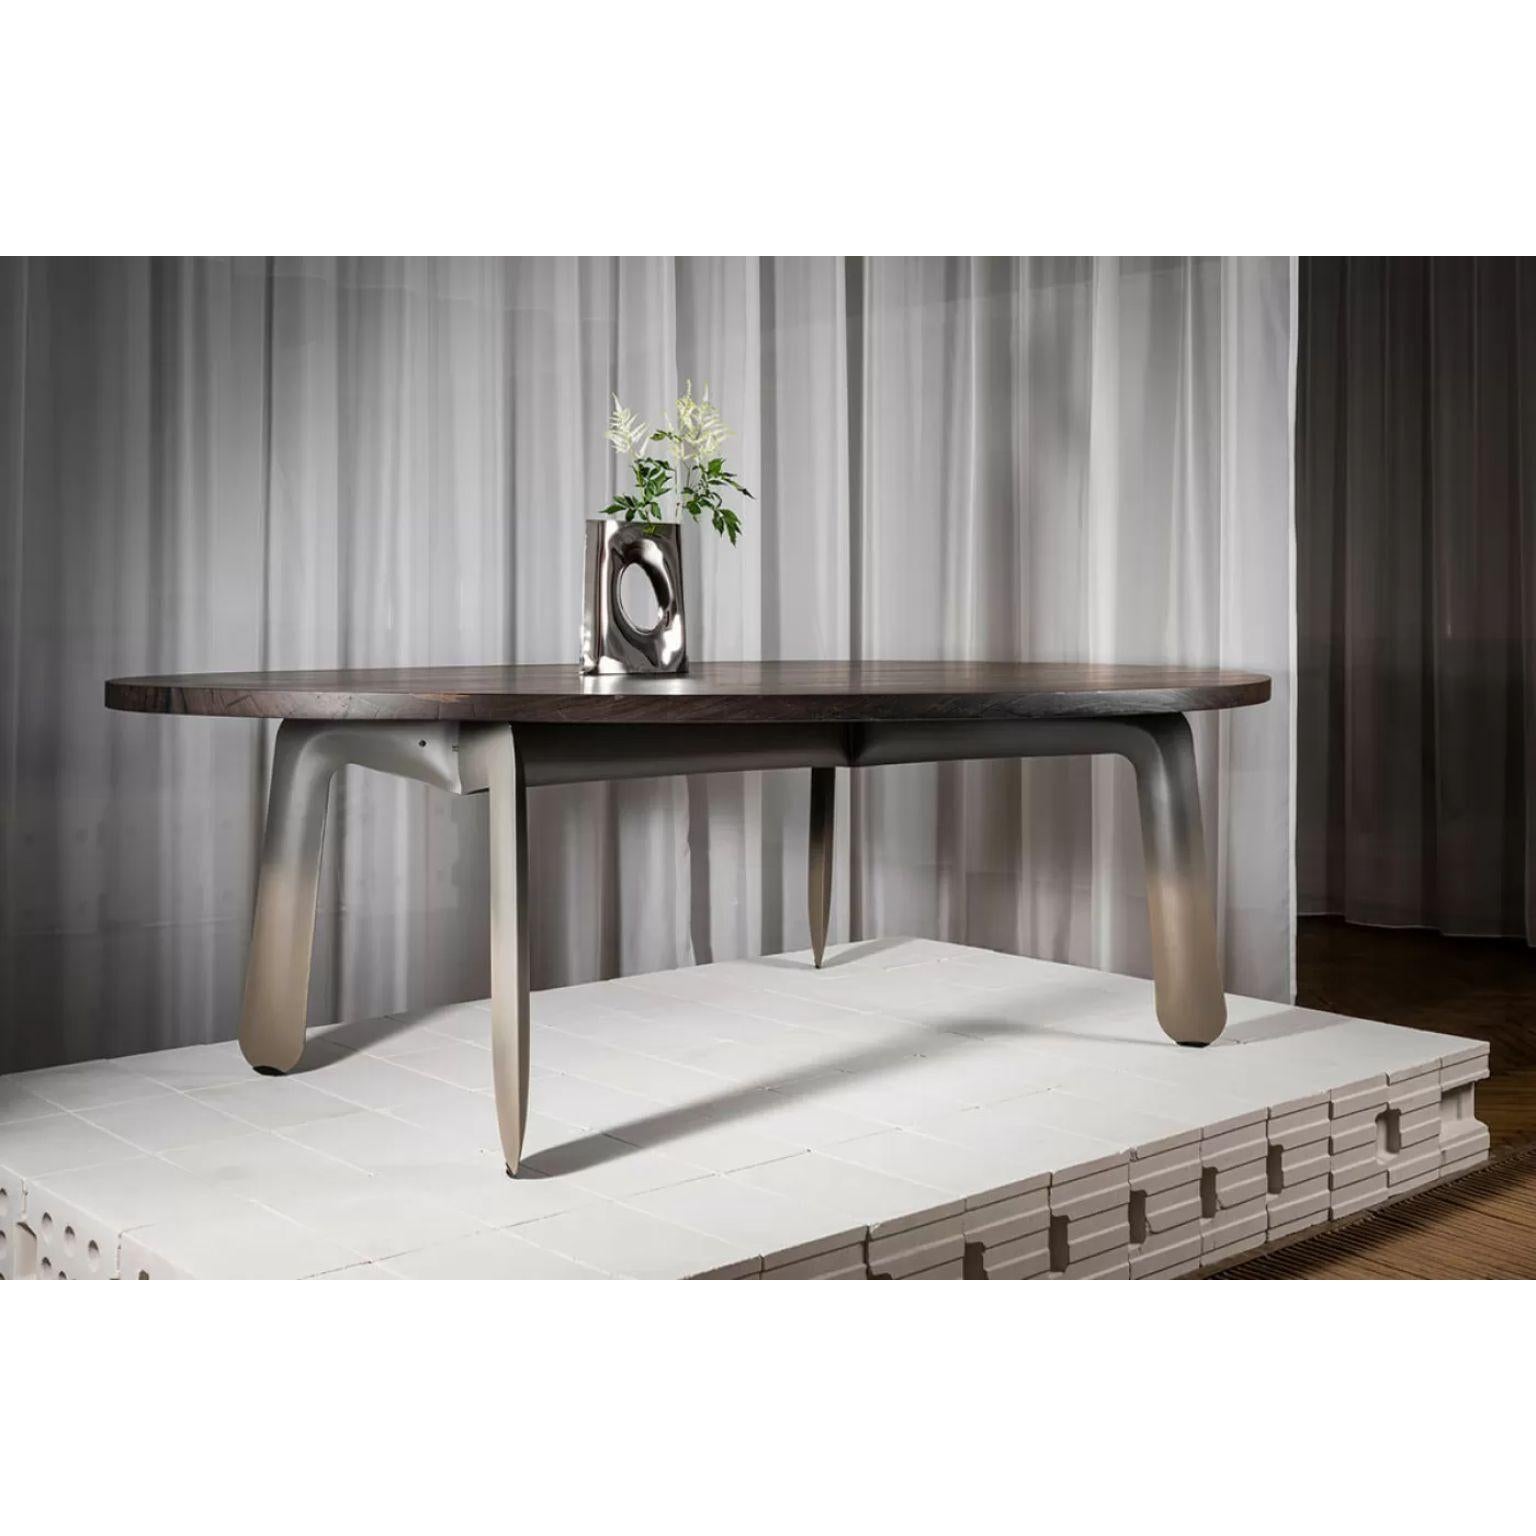 Chippensteel Table by Zieta
Dimensions: D 157 x W 250 x H 76 cm.
Materials: carbon steel base and bog oak top.

The CHIPPENSTEEL TABLE is a flashback to the first work in the internal pressure forming of steel. The object in its form and name